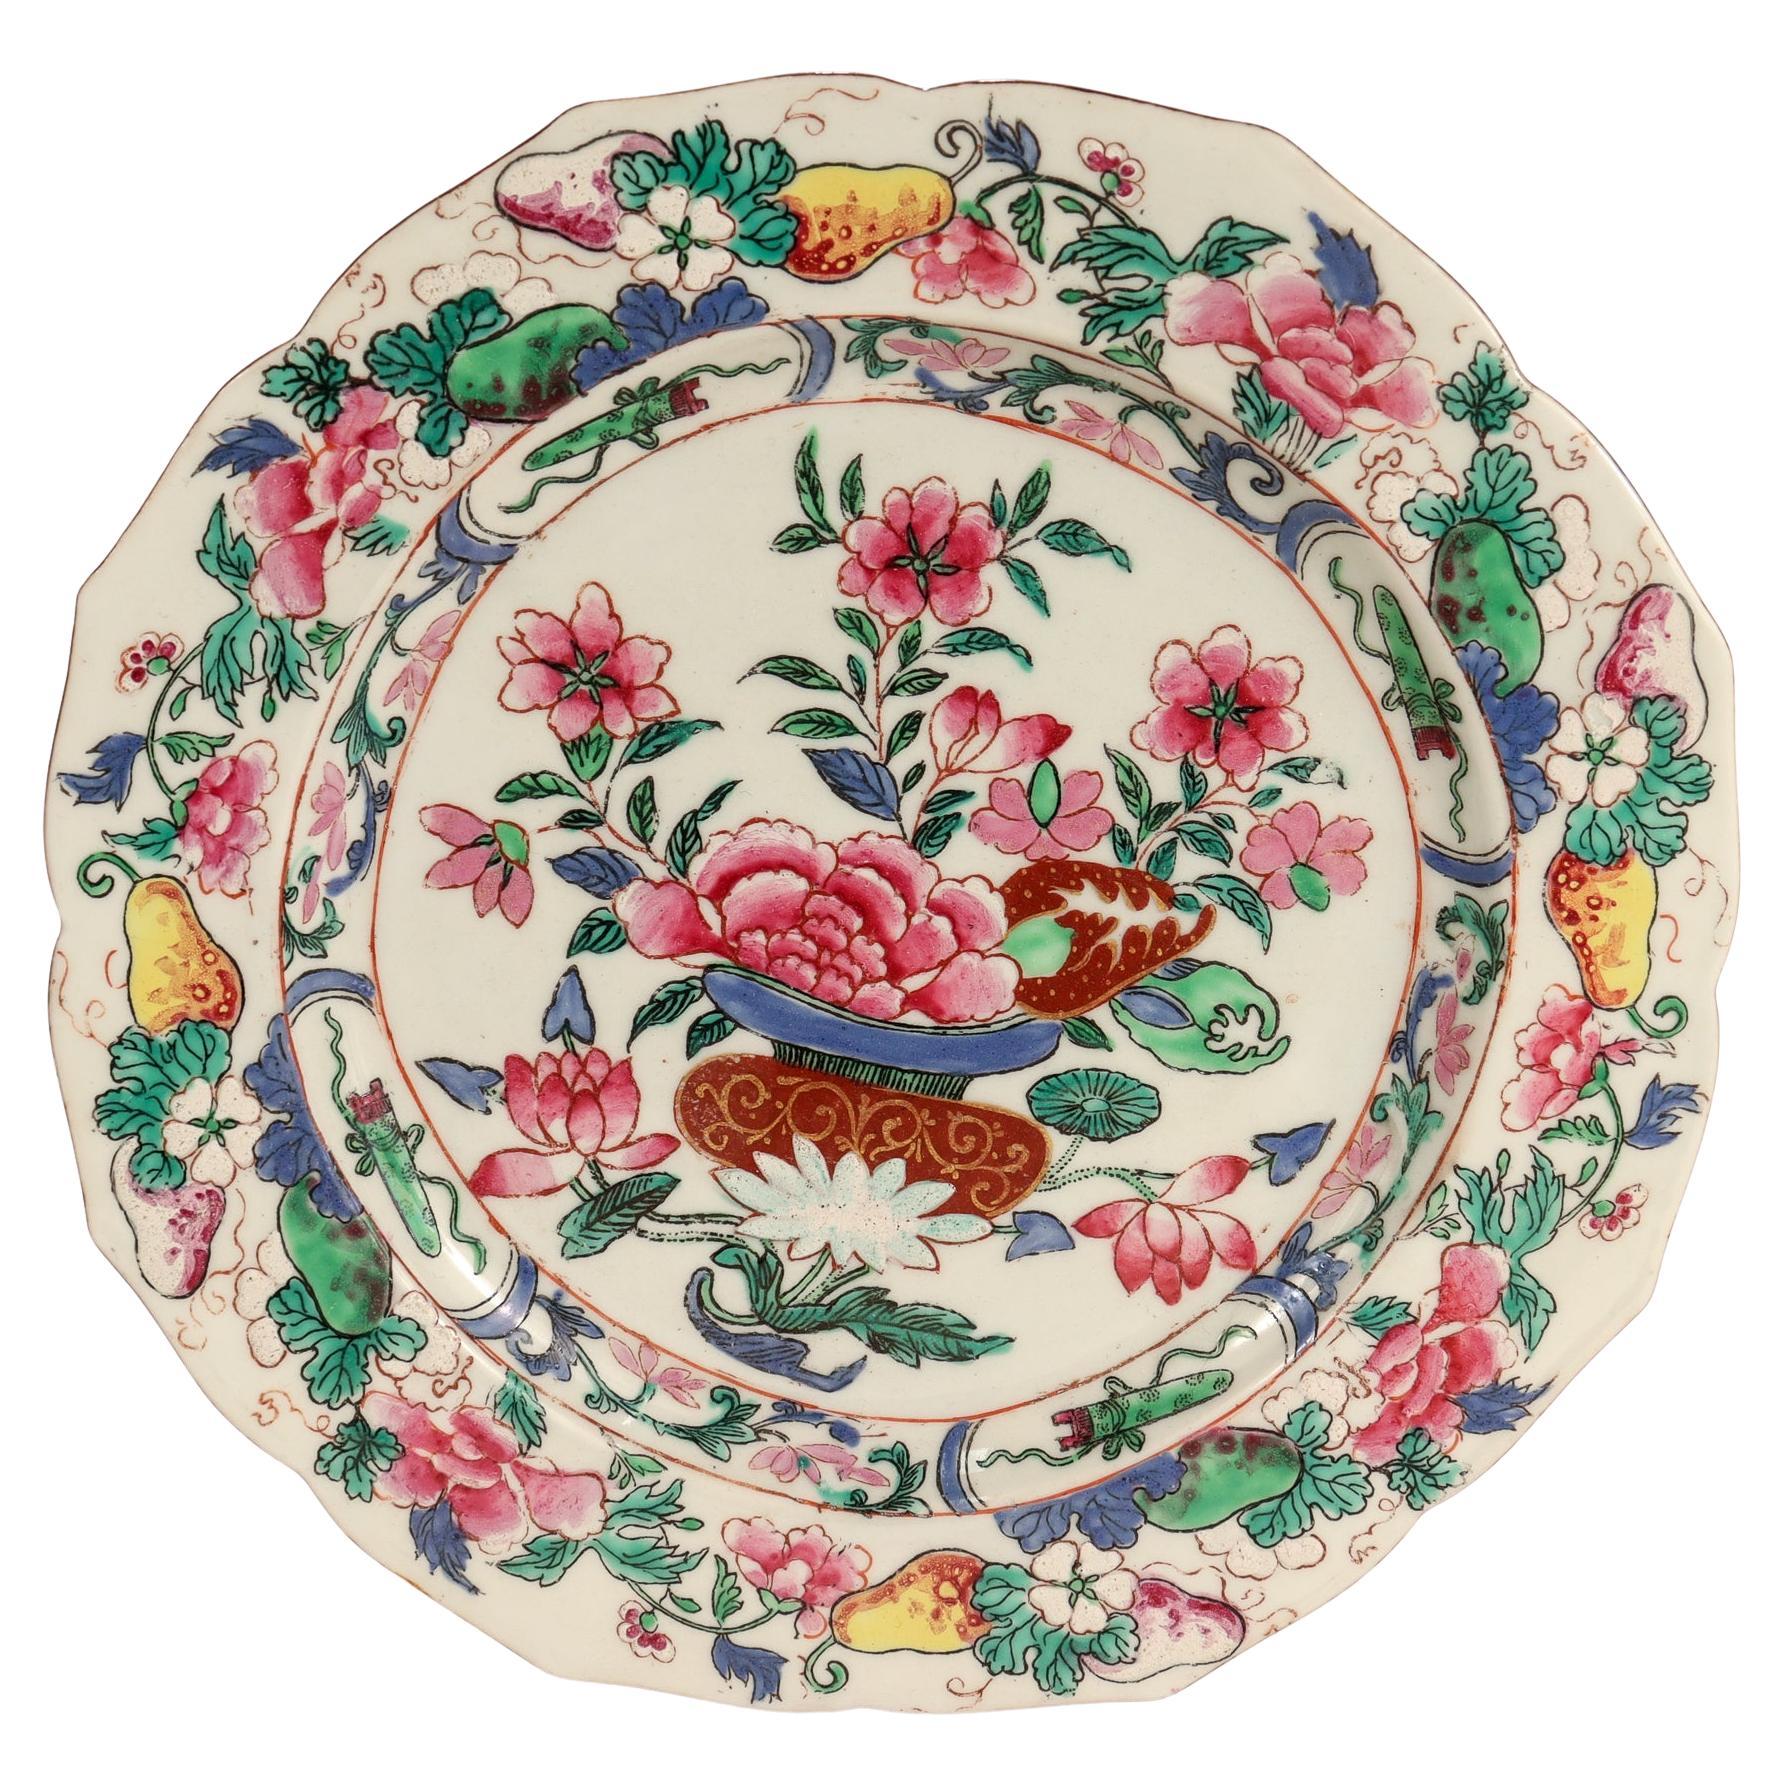 Old or Antique Chinese Export Famille Rose Plate with Basket of Flowers 